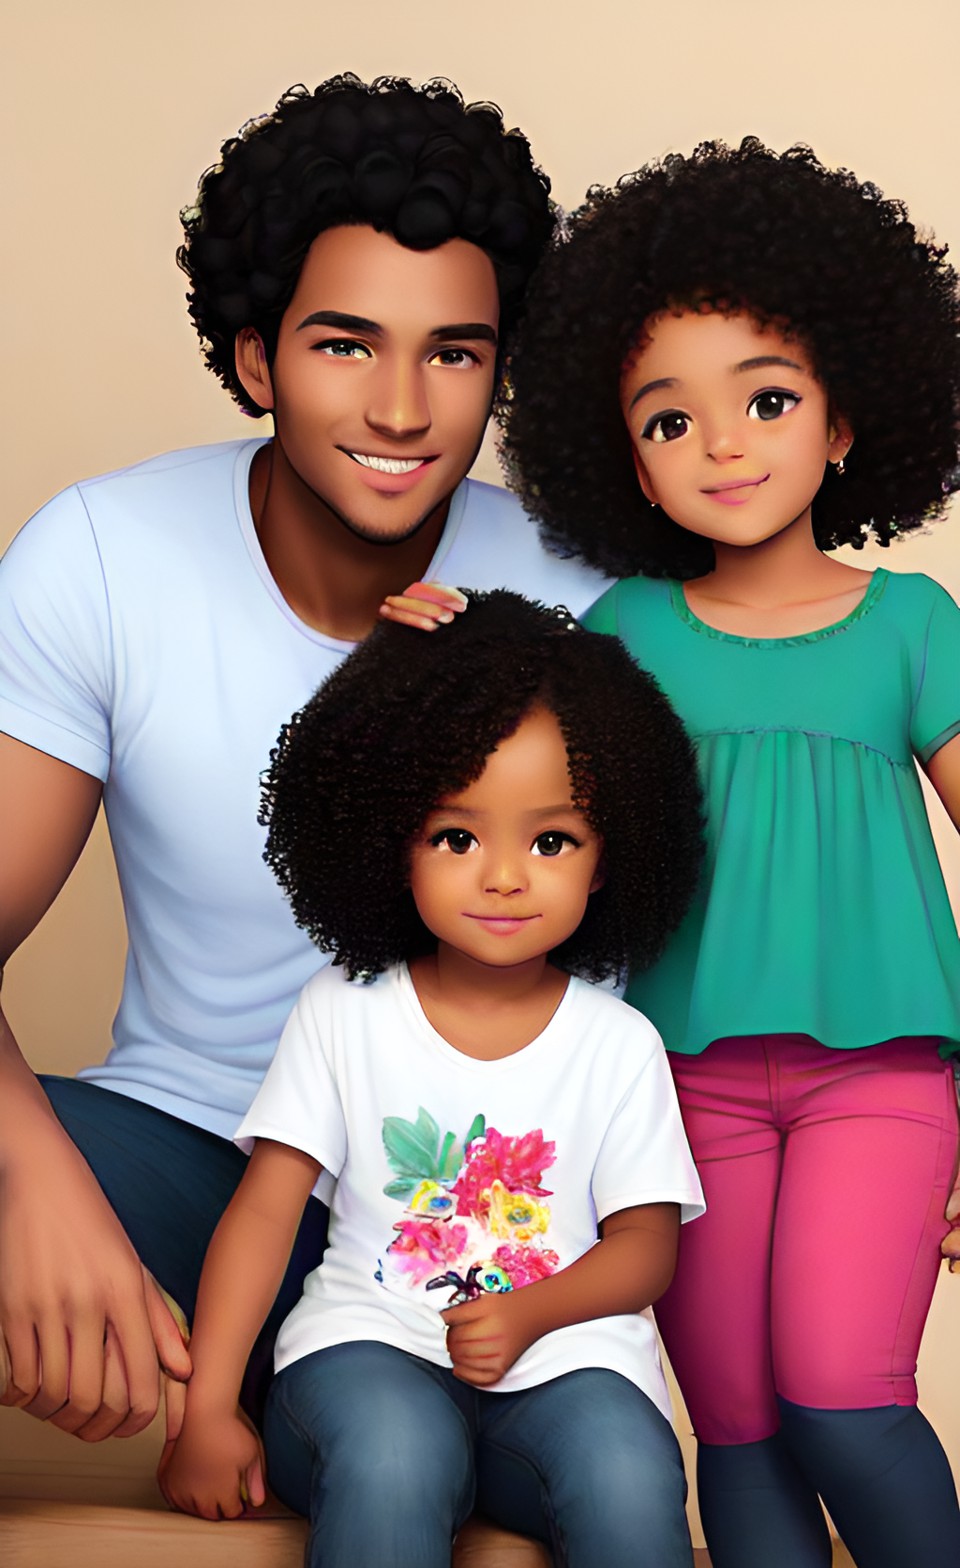 mixed race children with parents Dream_93